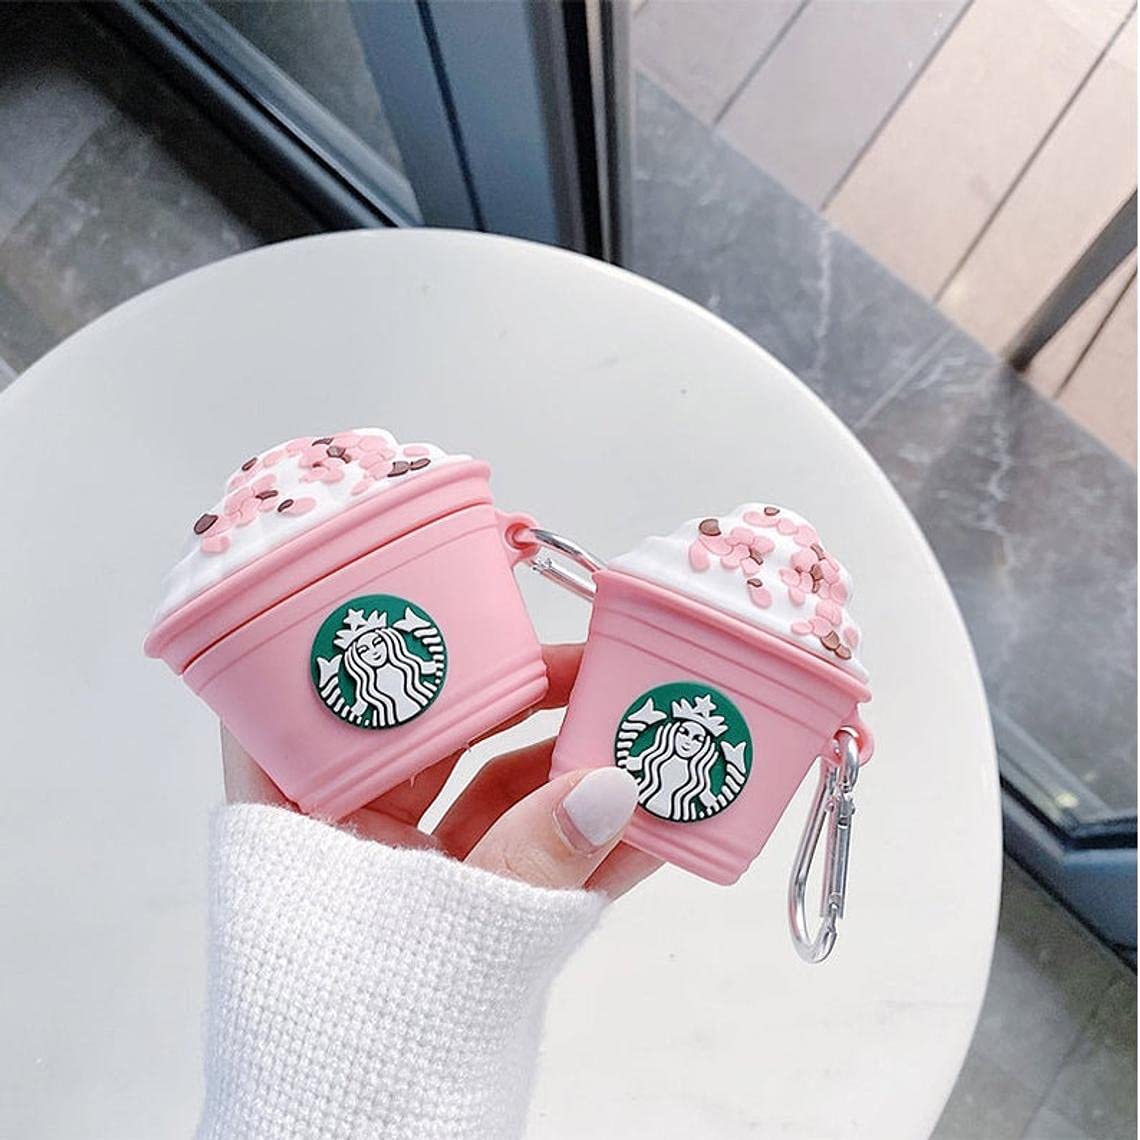 Starbucks (Pink)  Airpods Cover  for Apple AirPods -  Premium Silicone Case Cover